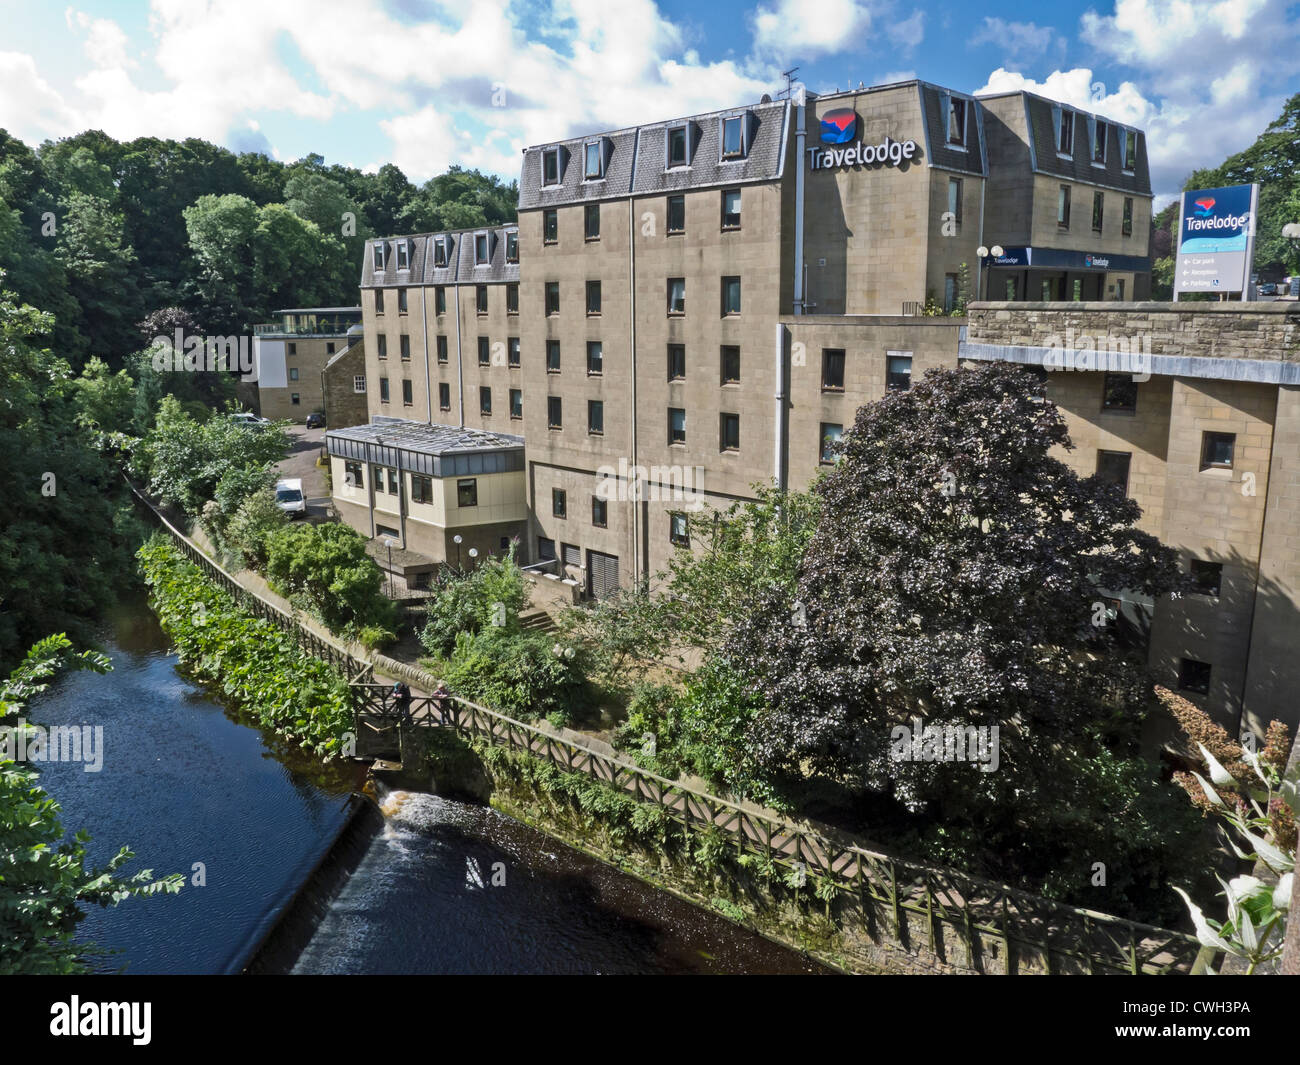 Travelodge hotel by Water of Leith on Belford Road in Edinburgh Scotland Stock Photo